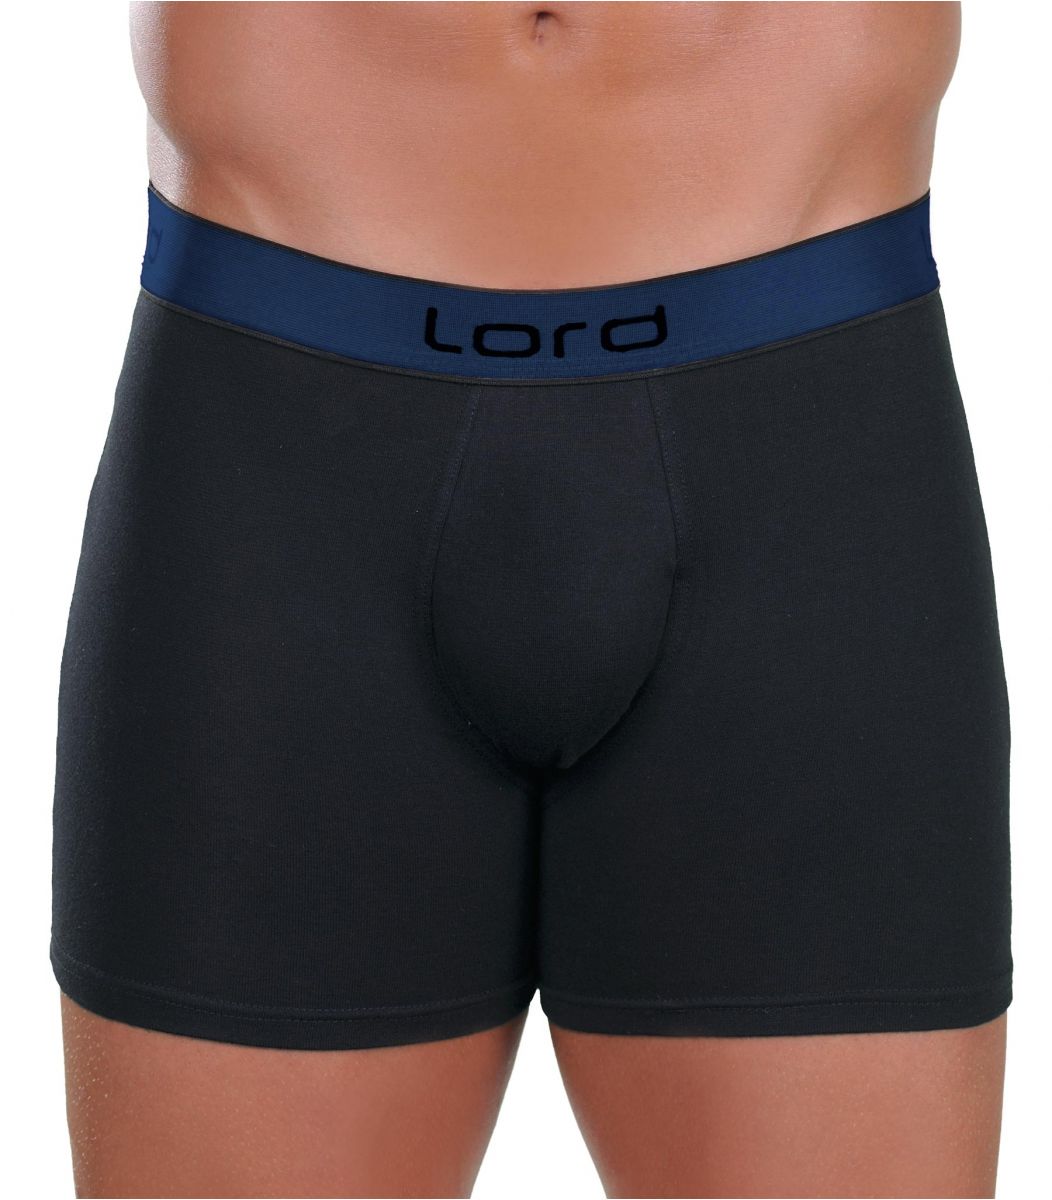  Boxers Lord Lord Boxer Athletic 8192-8